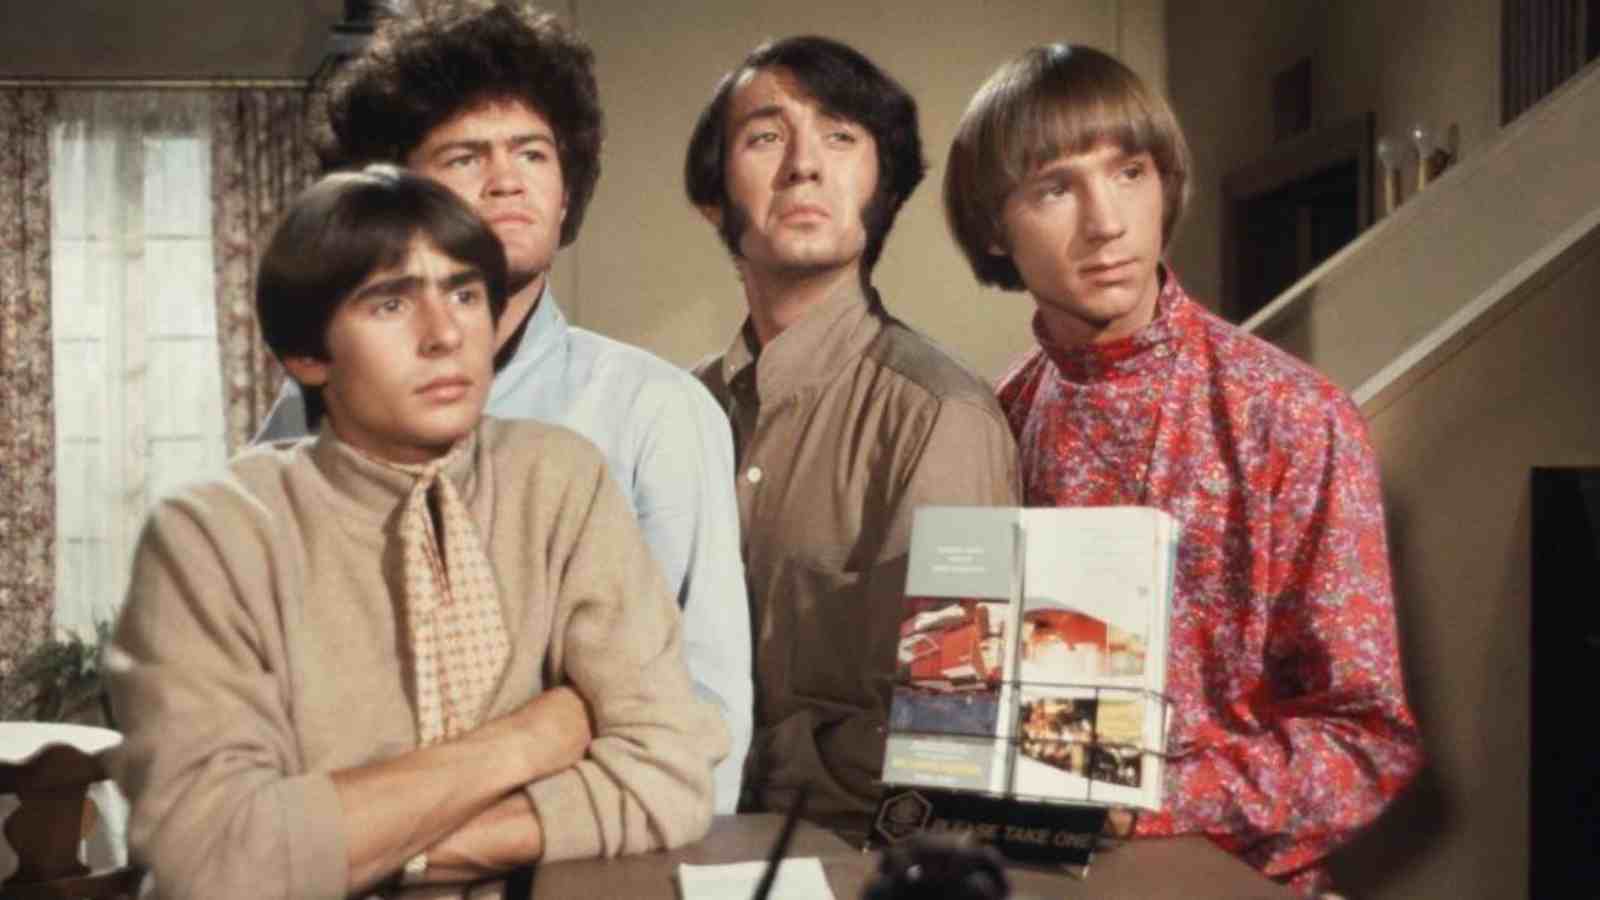 Micky Dolenz sues FBI for their report on The Monkees from 1967